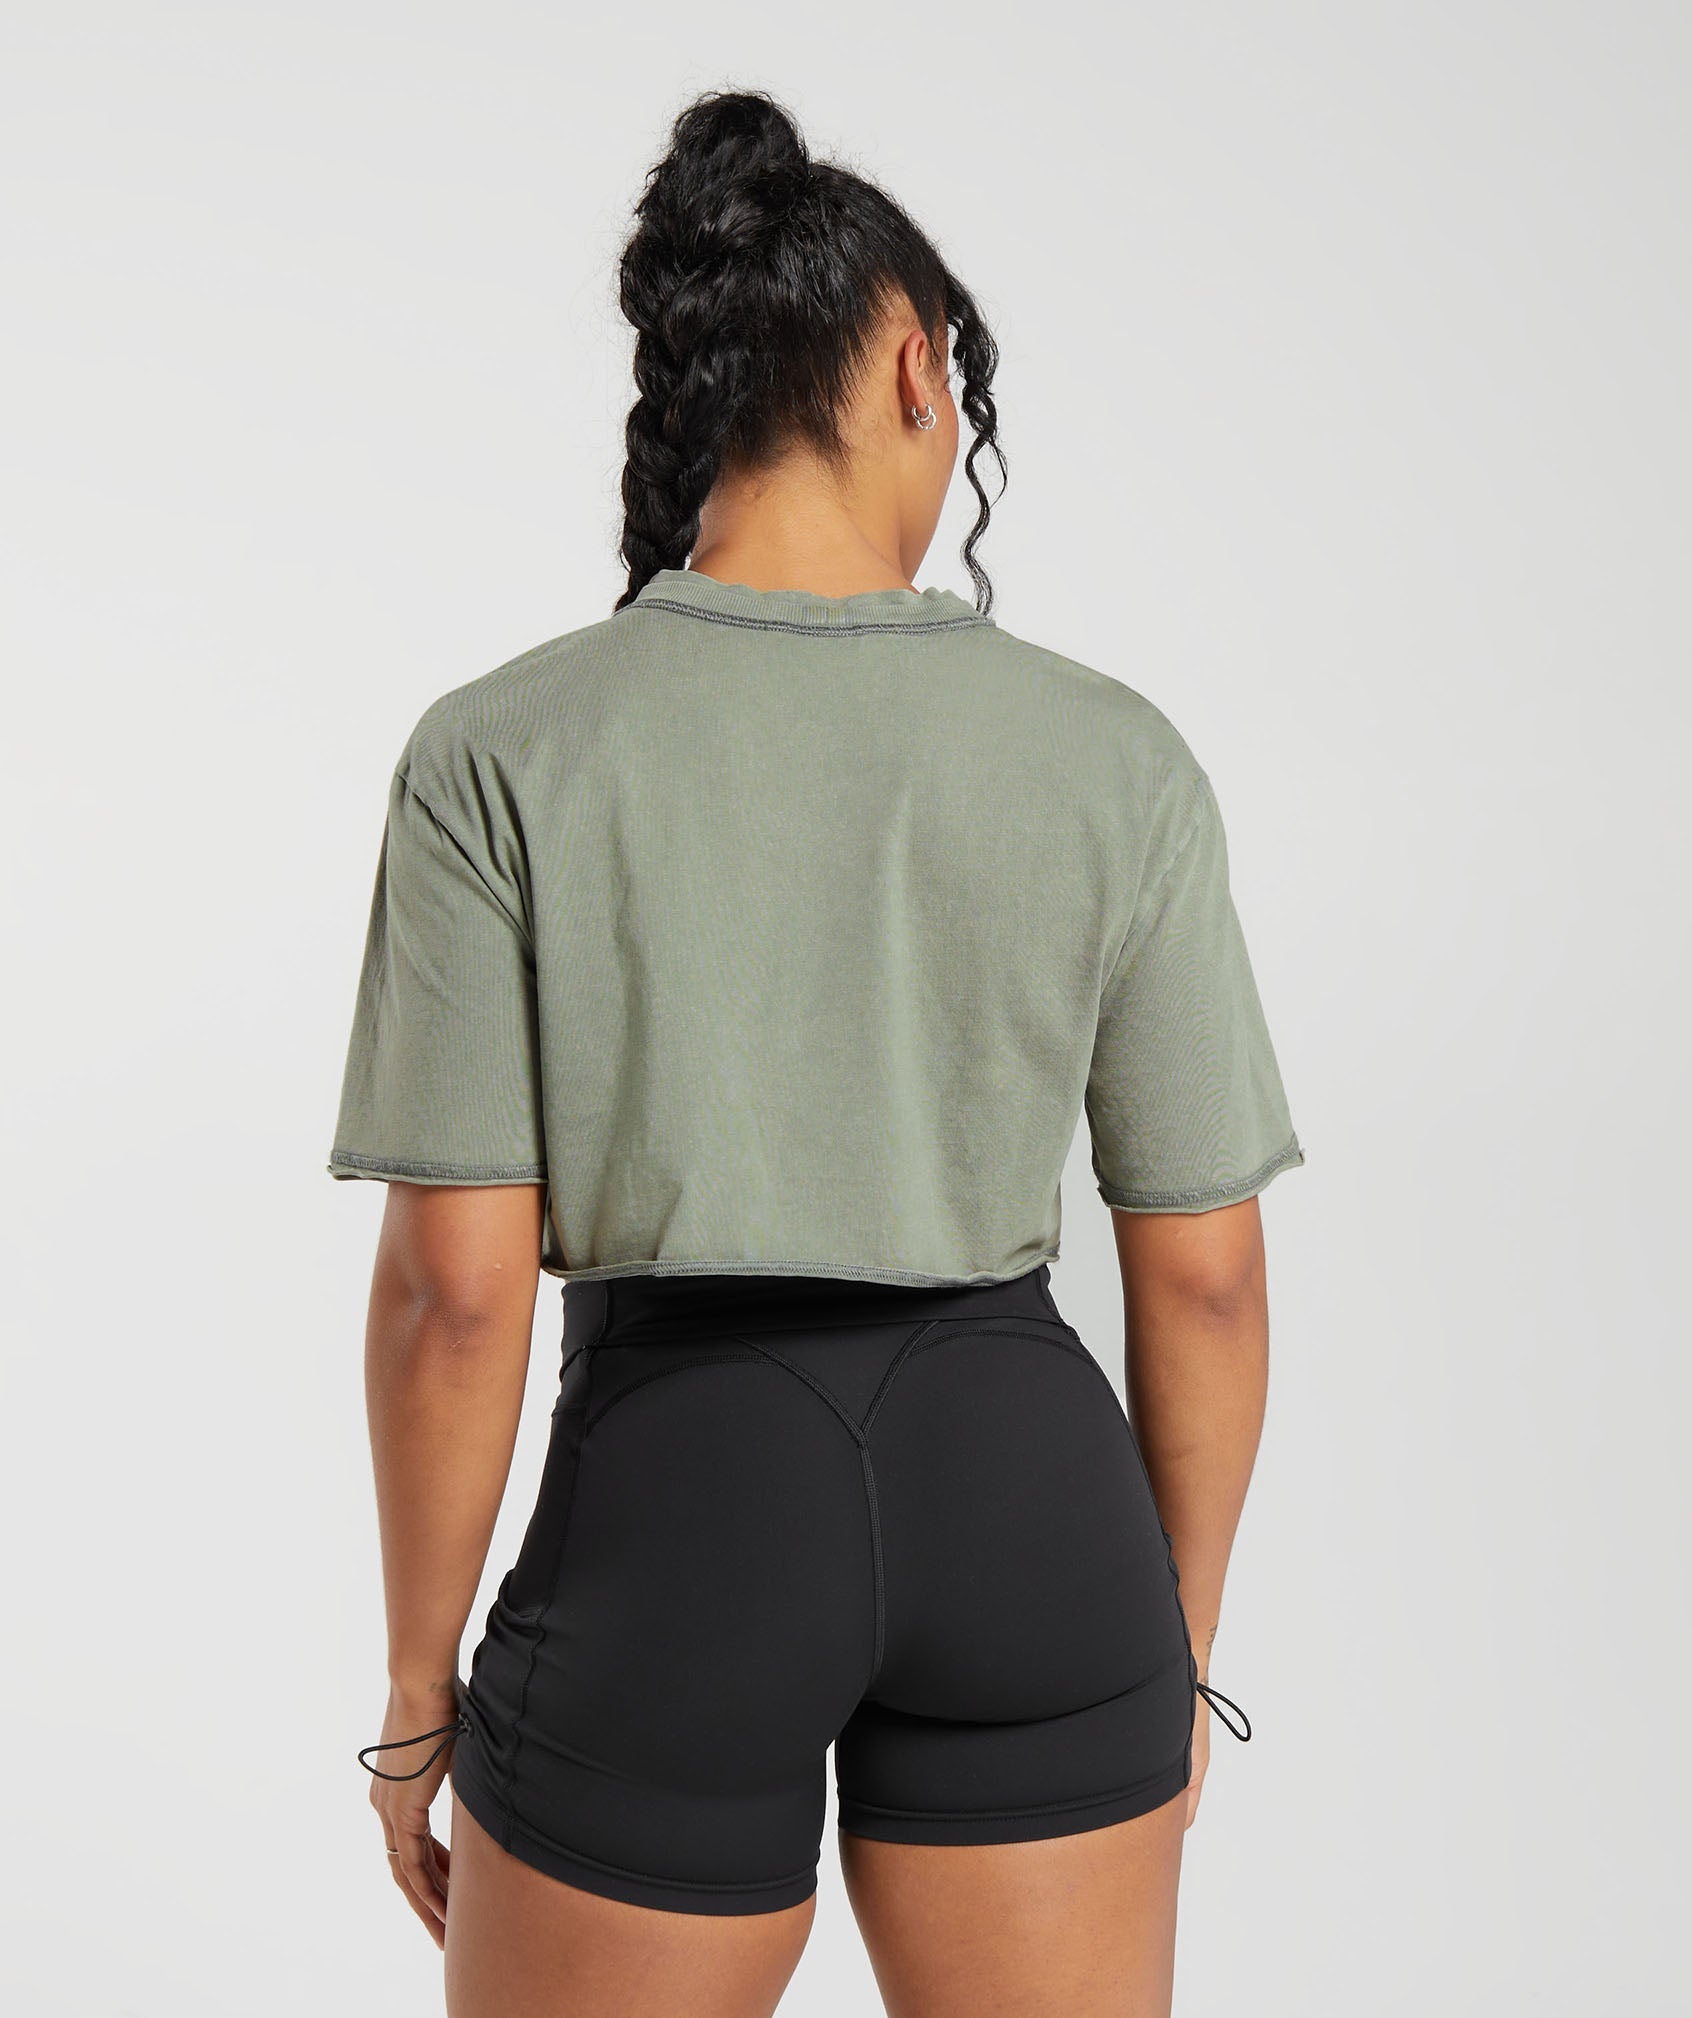 Legacy Washed Crop Top in Dusk Green - view 2